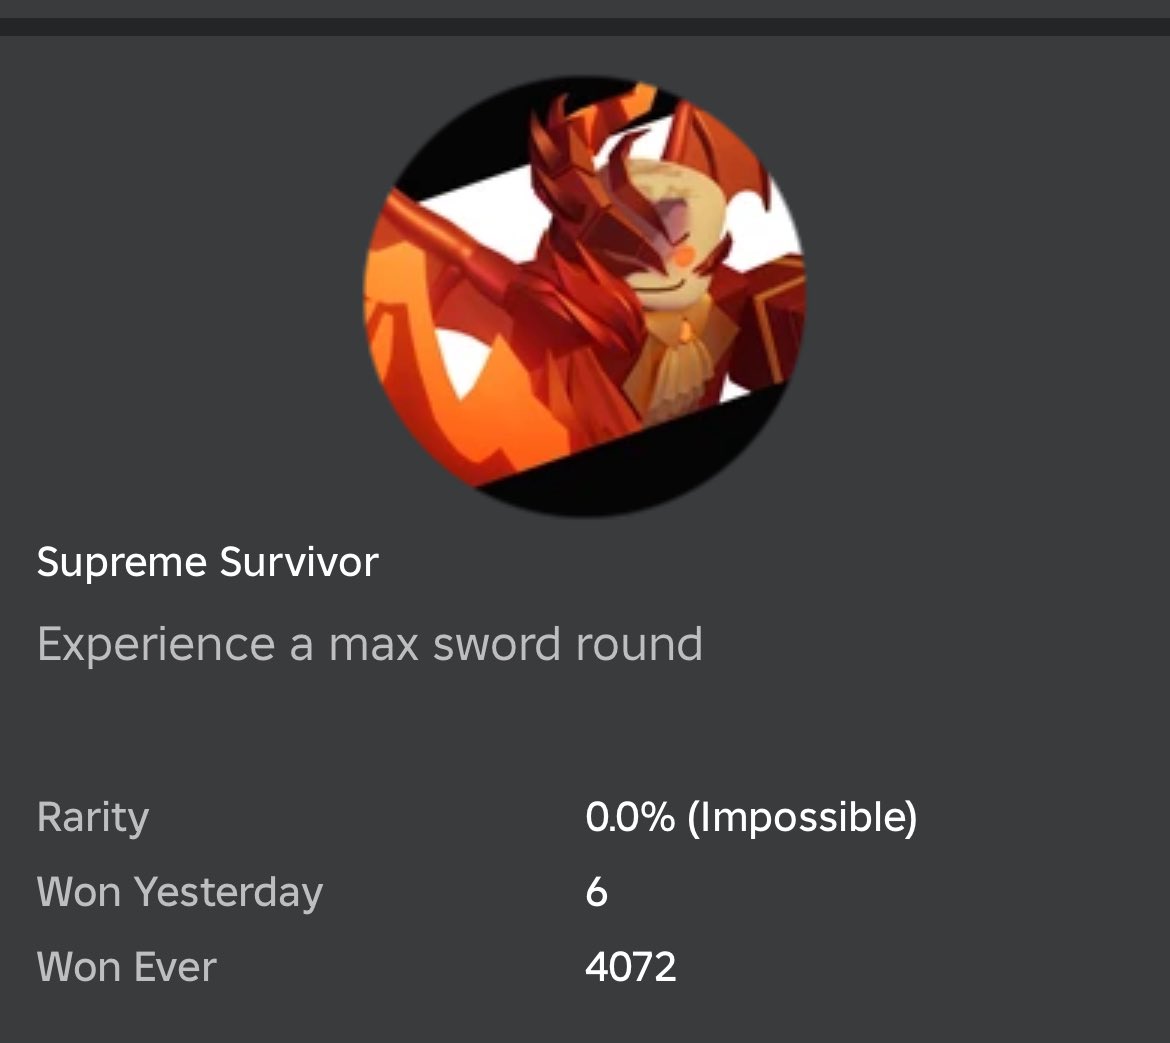 dude why do less people have the SHURIKEN badge than the max sword round one??? 😭